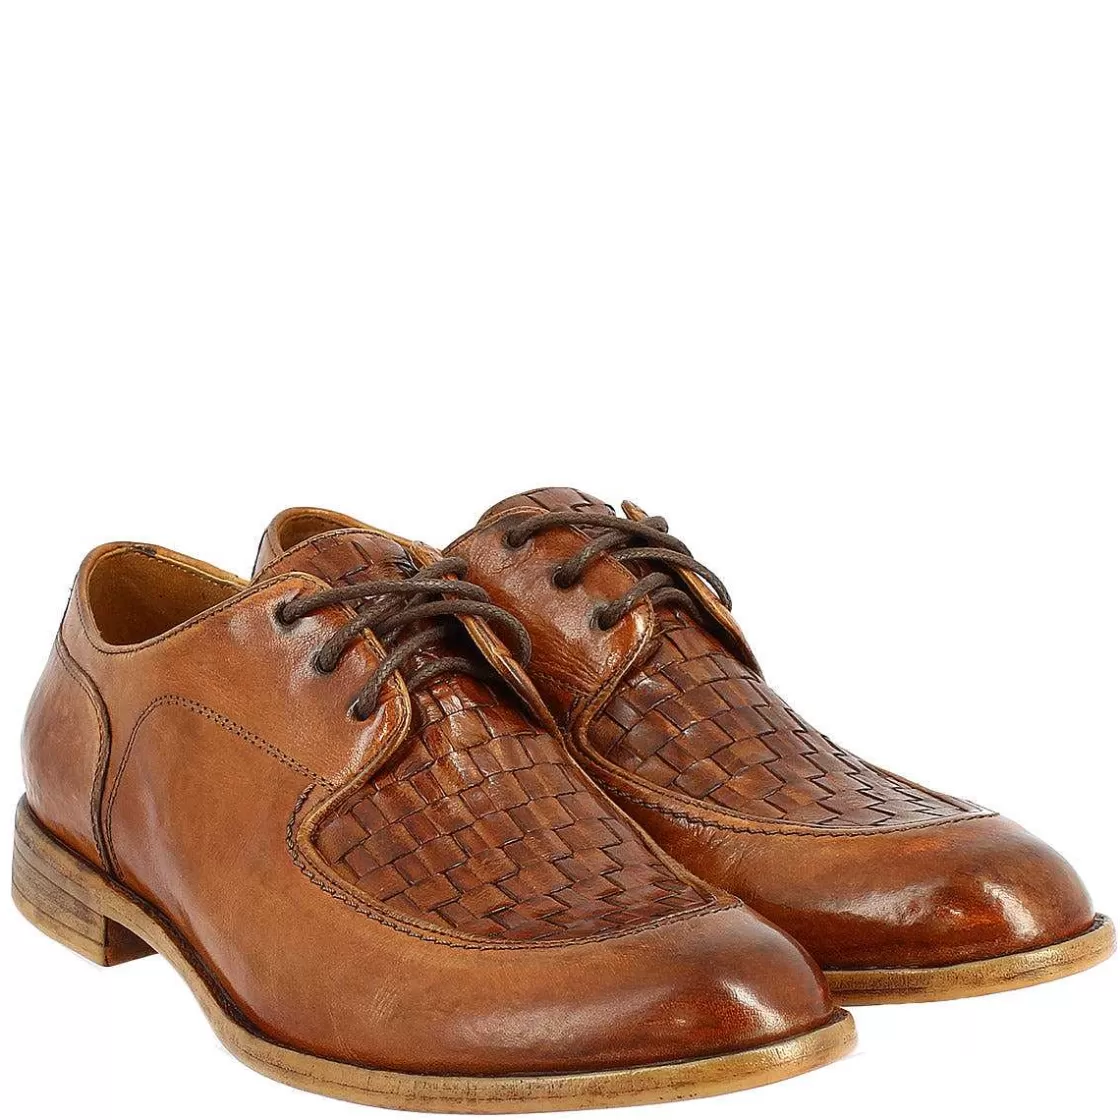 Leonardo Men'S Handmade Lace-Up Shoes In Siena Color Buffalo Leather Outlet